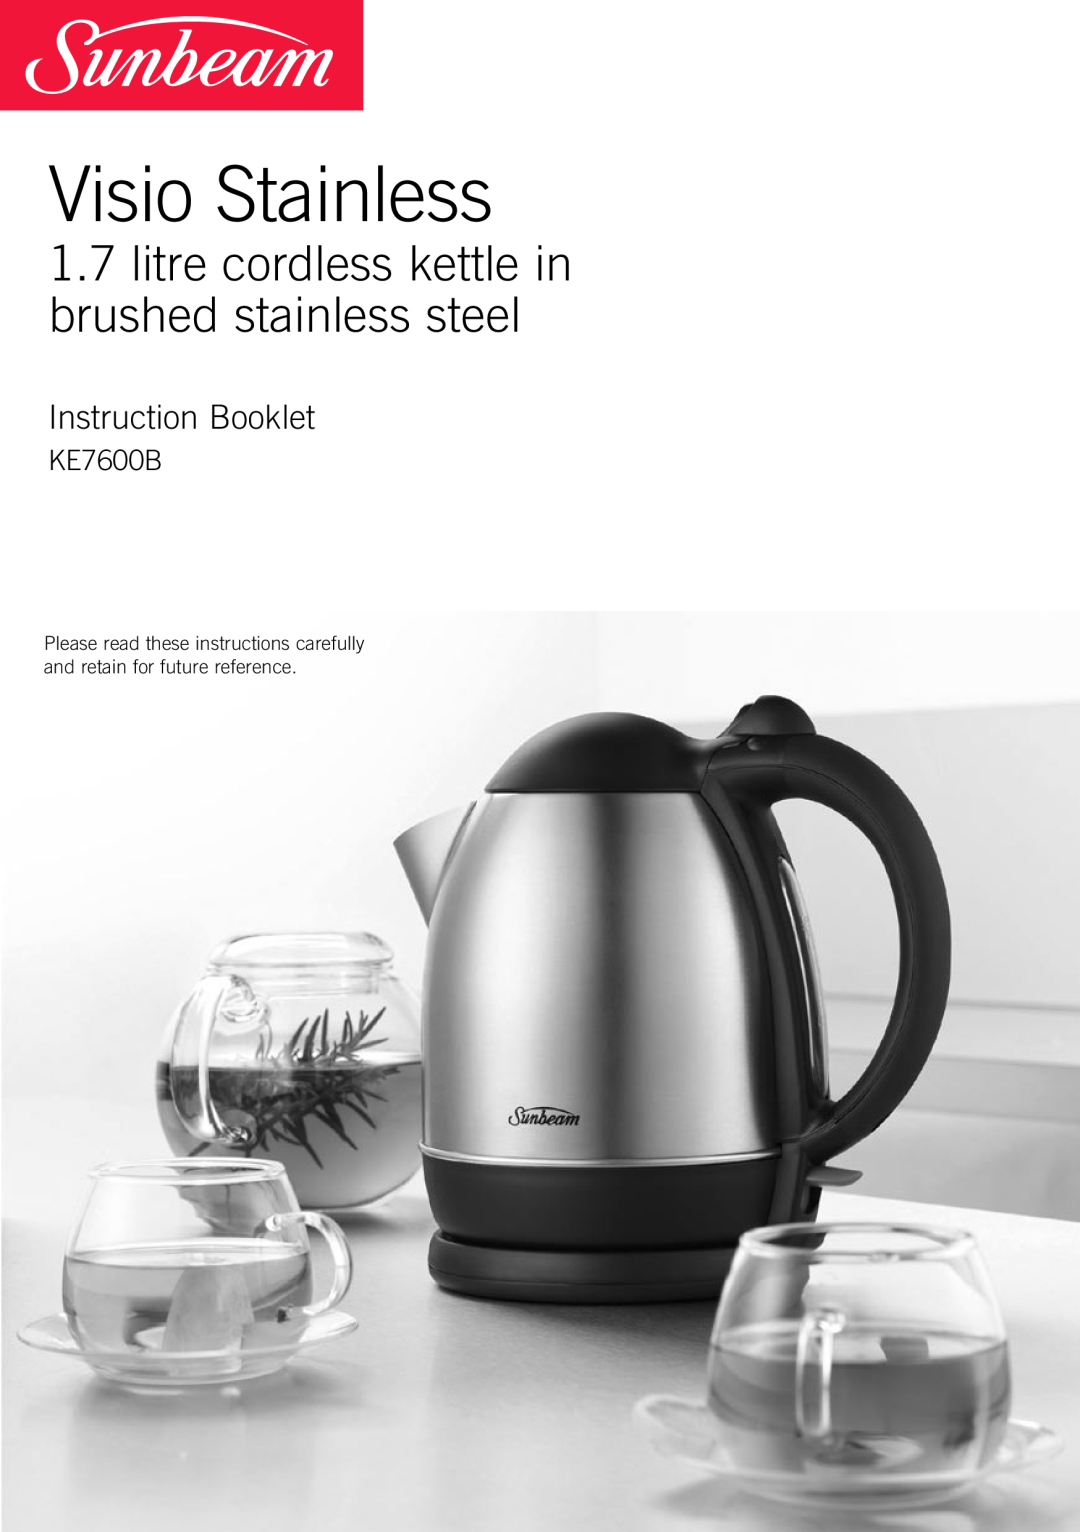 Sunbeam KE7600B manual Visio Stainless, litre cordless kettle in brushed stainless steel, Instruction Booklet 